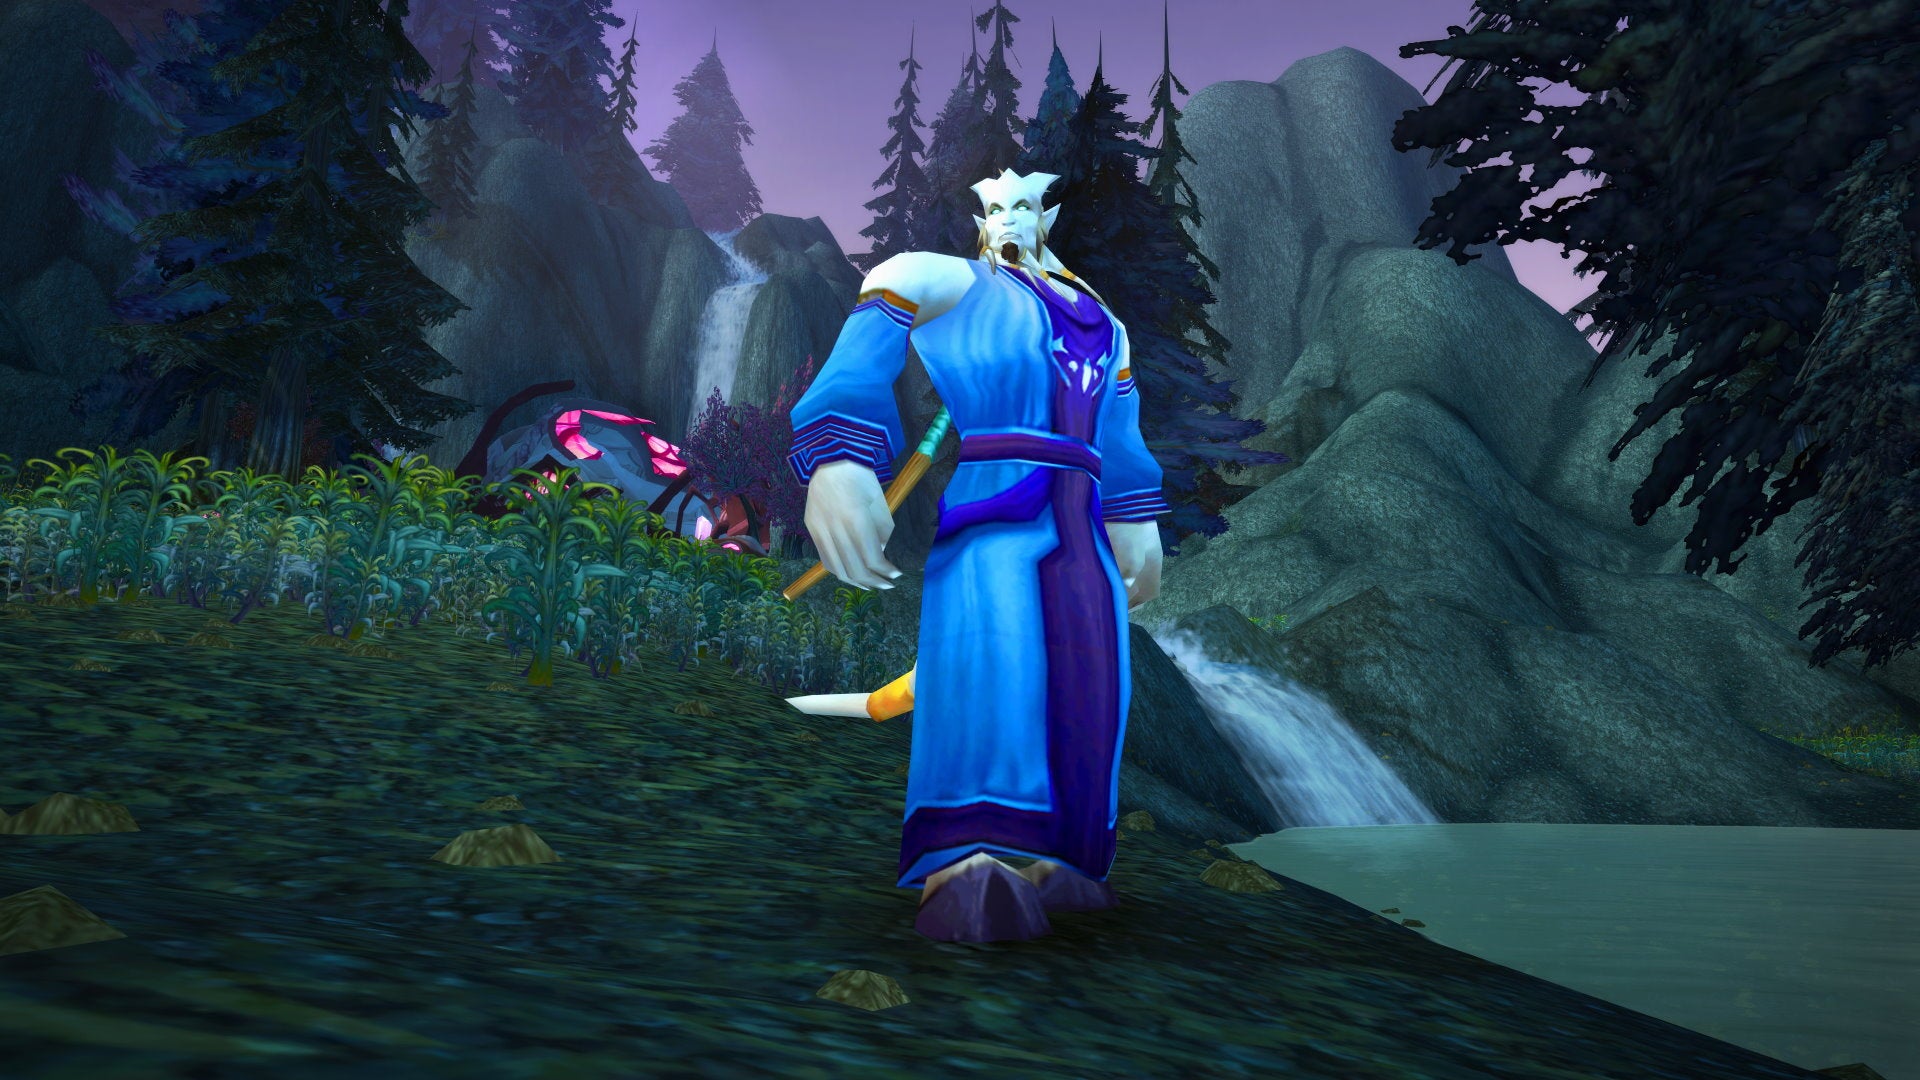 A large blue goat like creature called the Draenei from World Of Warcraft